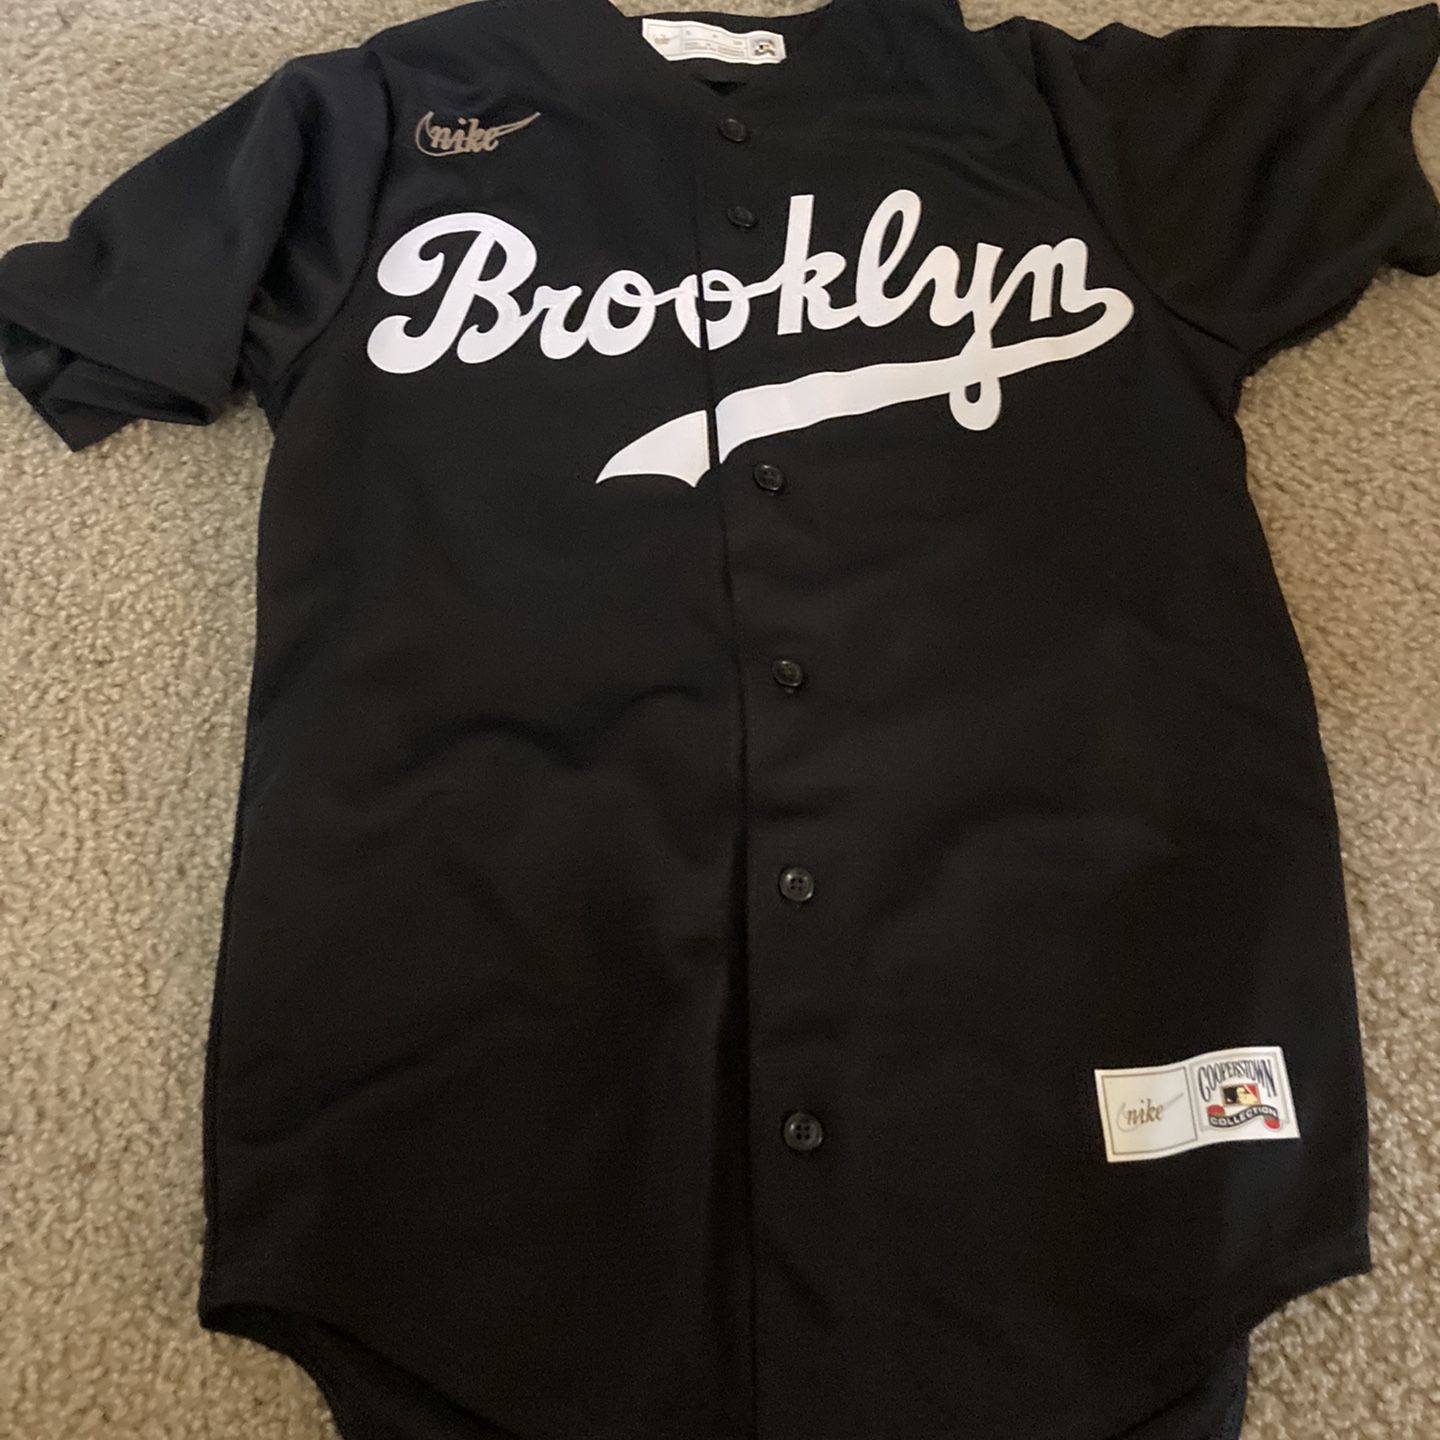 Jackie Robinson Jersey for Sale in North Las Vegas, NV - OfferUp